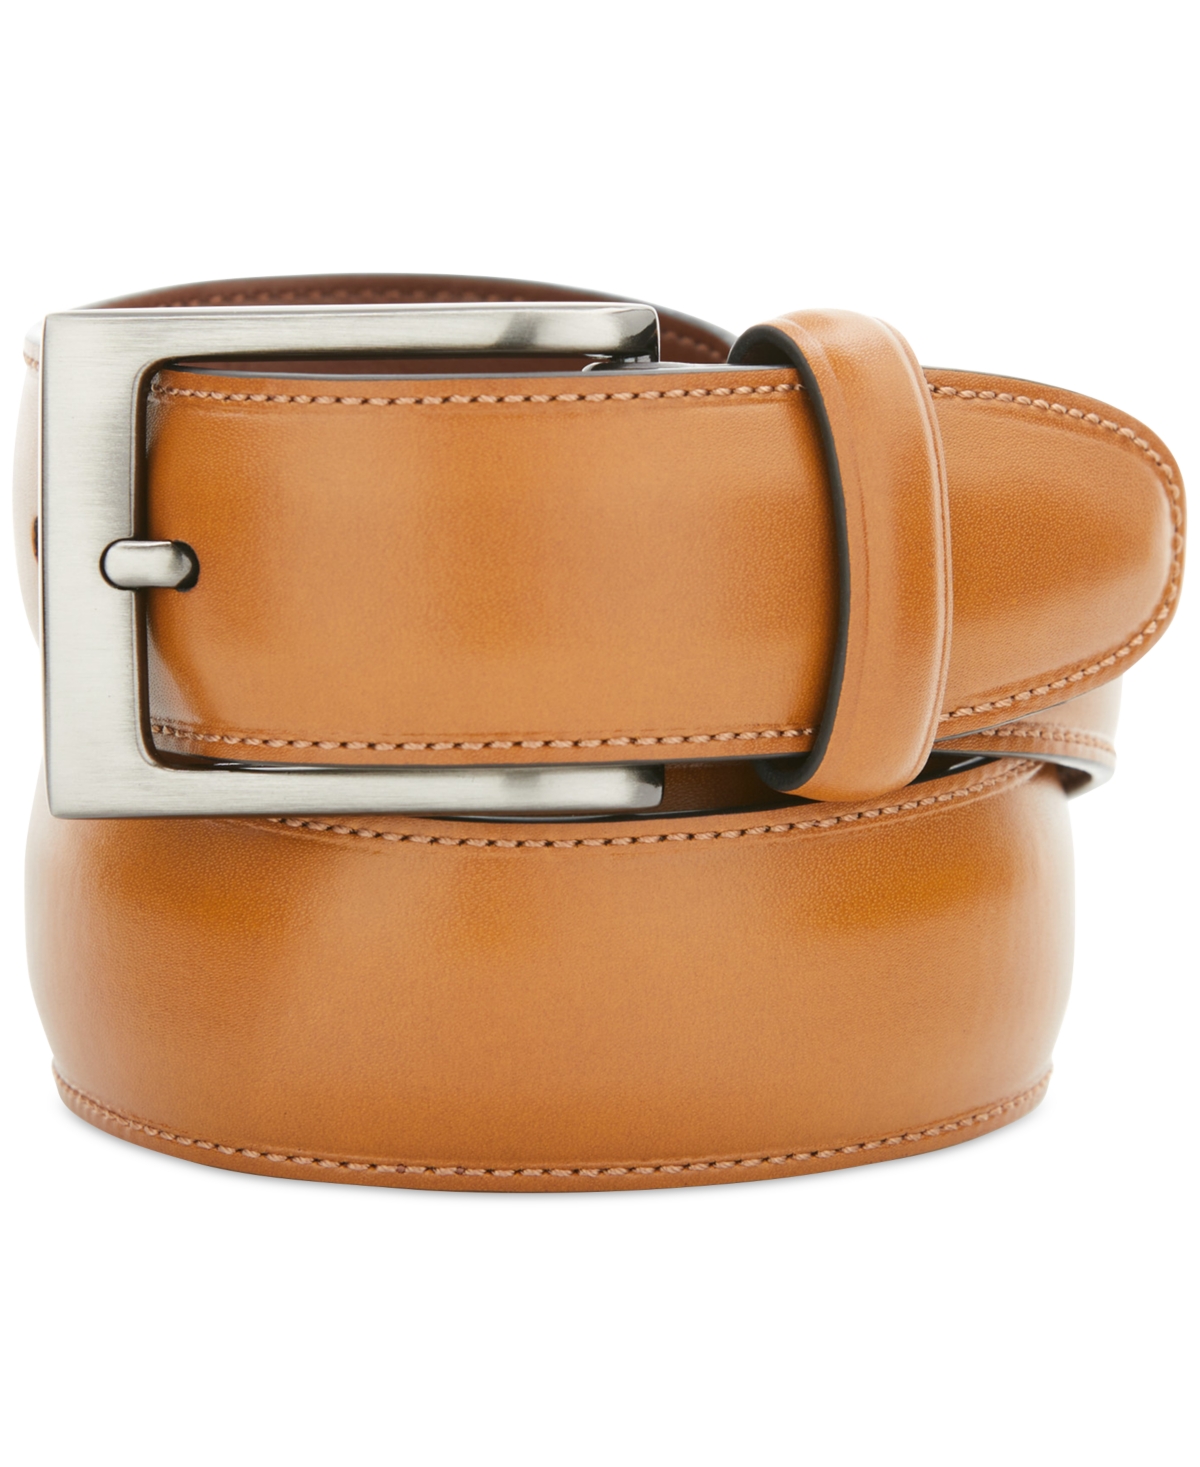 Perry Ellis Men's Faux Leather Dress Belt (Luggage) $8 + Free Store Pick Up at Macy's or Free Shipping on $25+